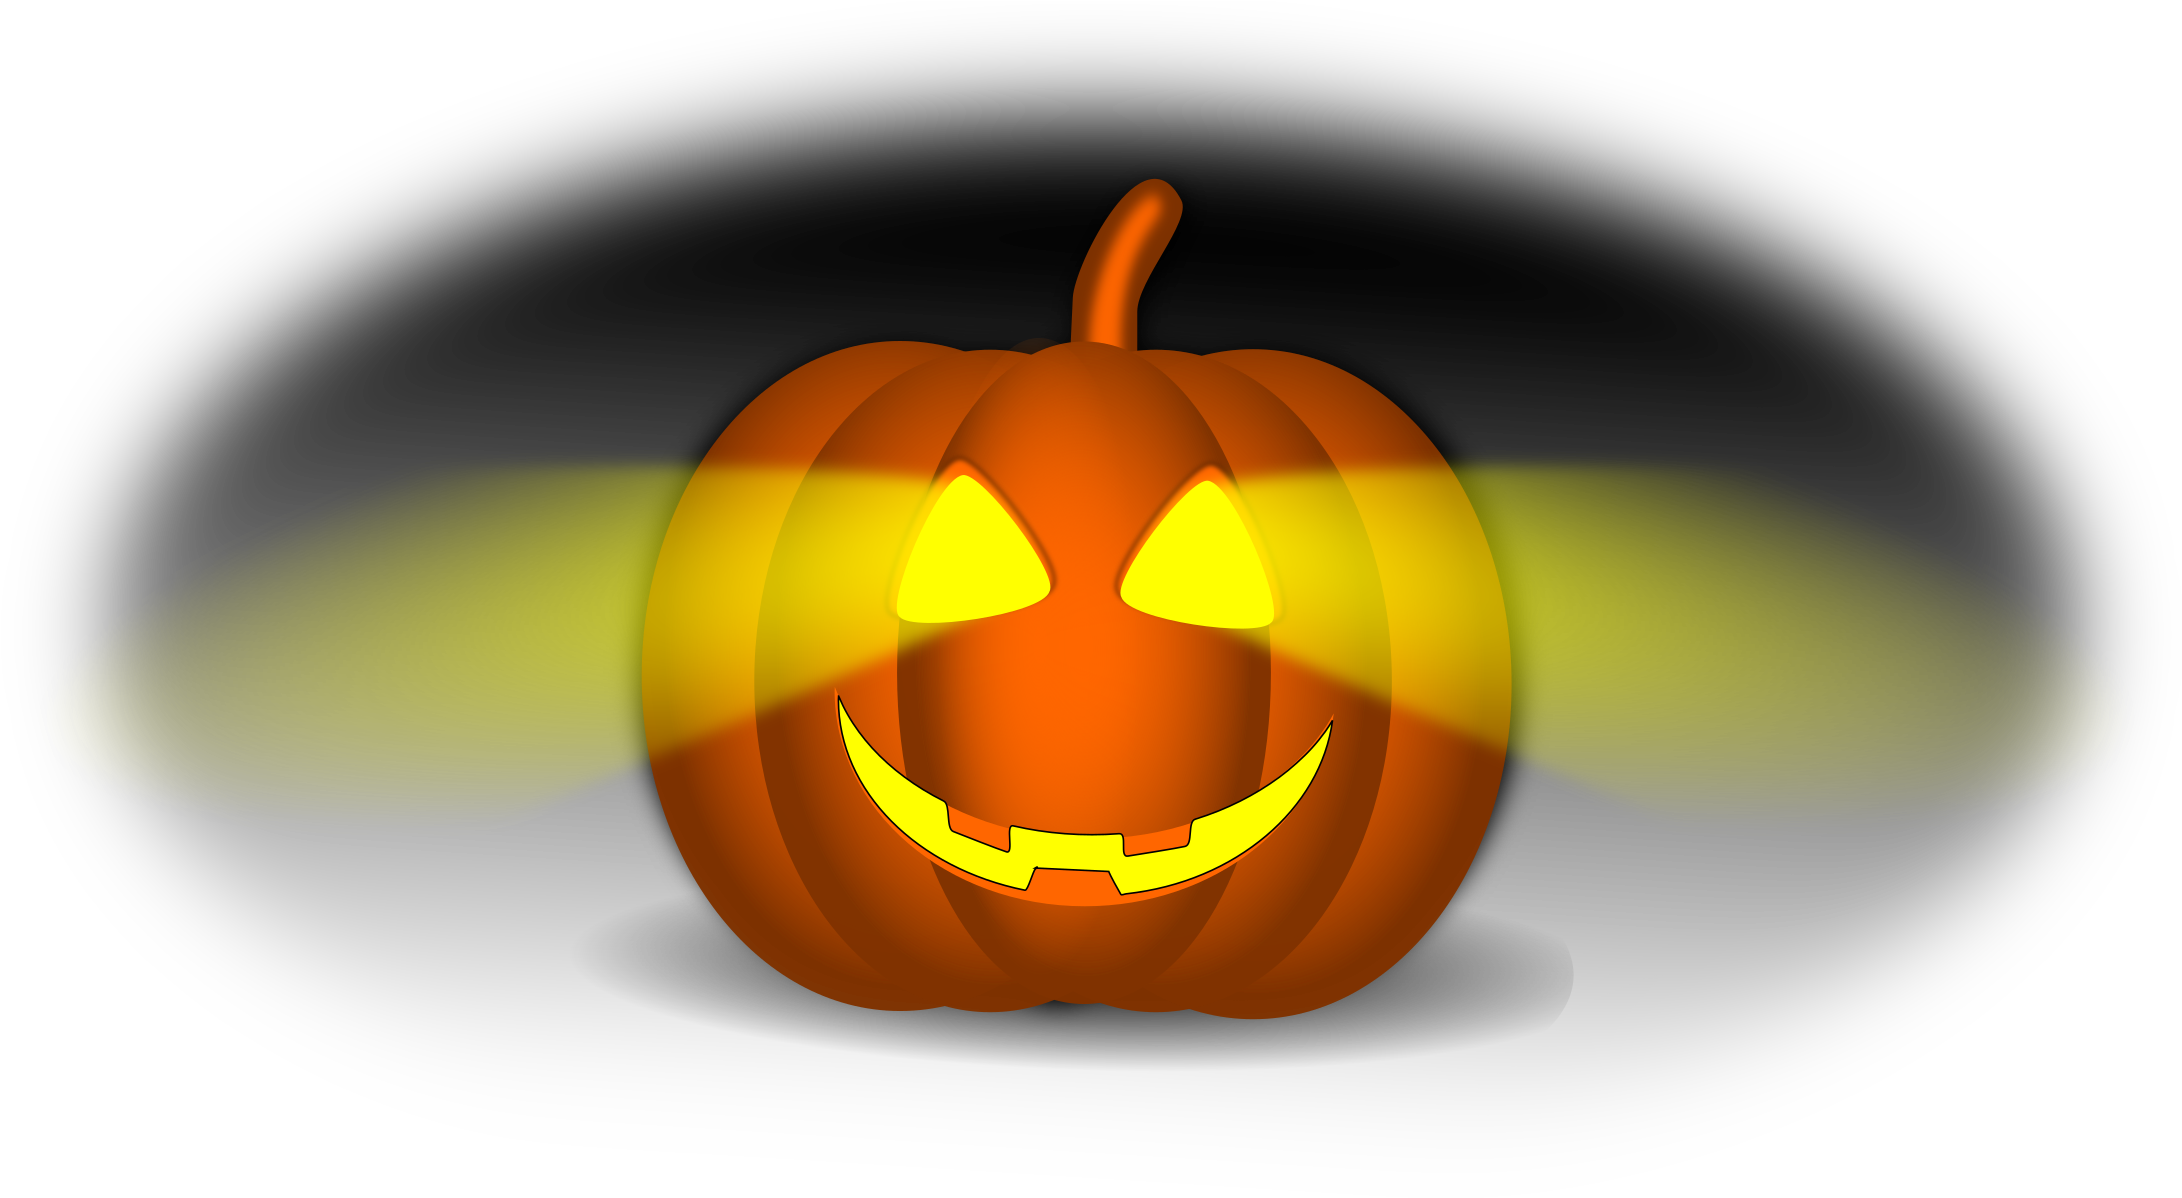 A Pumpkin With Glowing Eyes